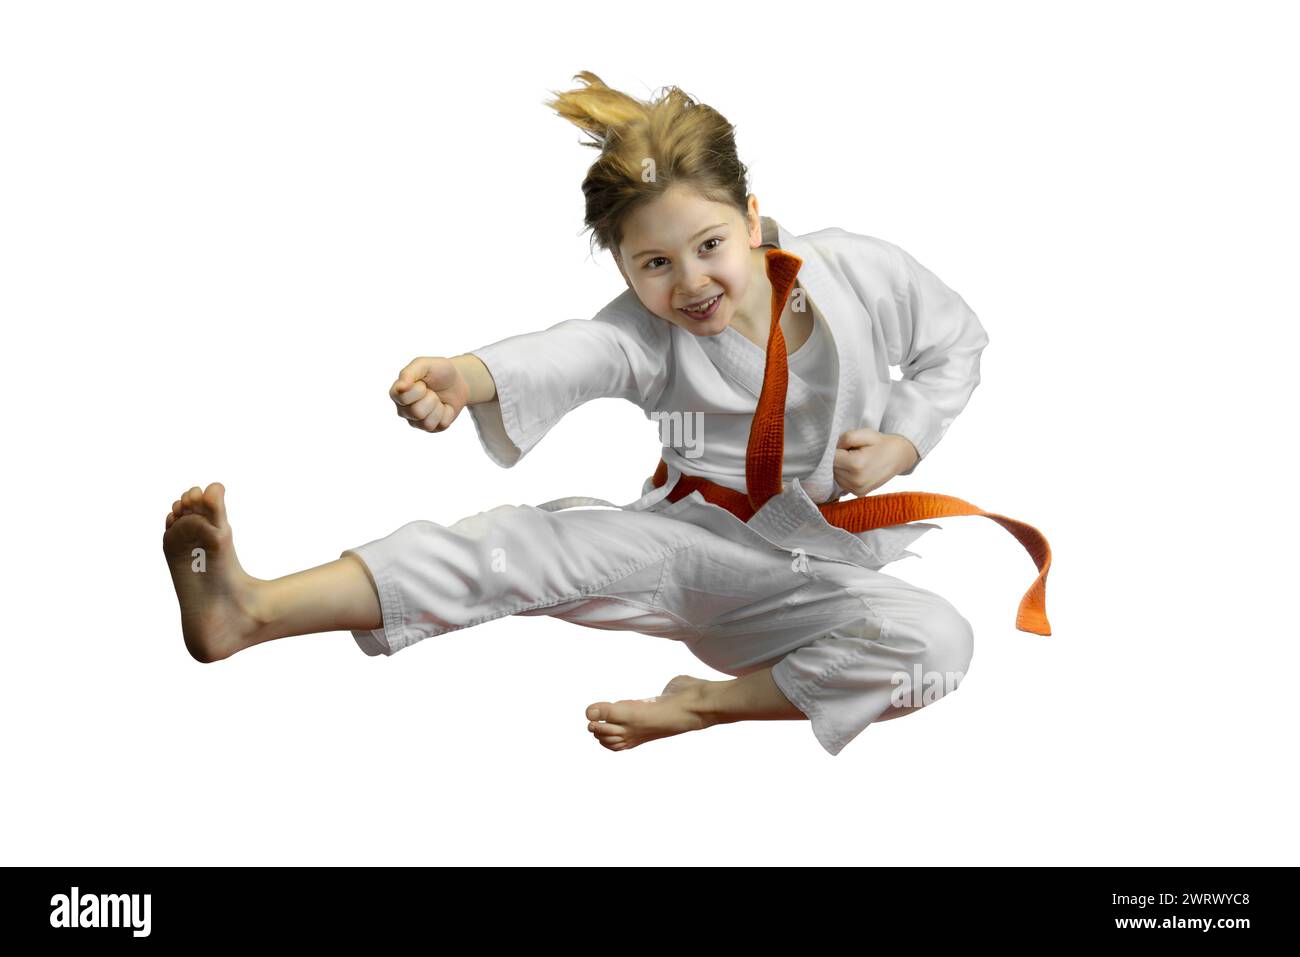 Energetic young girl performing a karate kick, isolated on white background Stock Photo